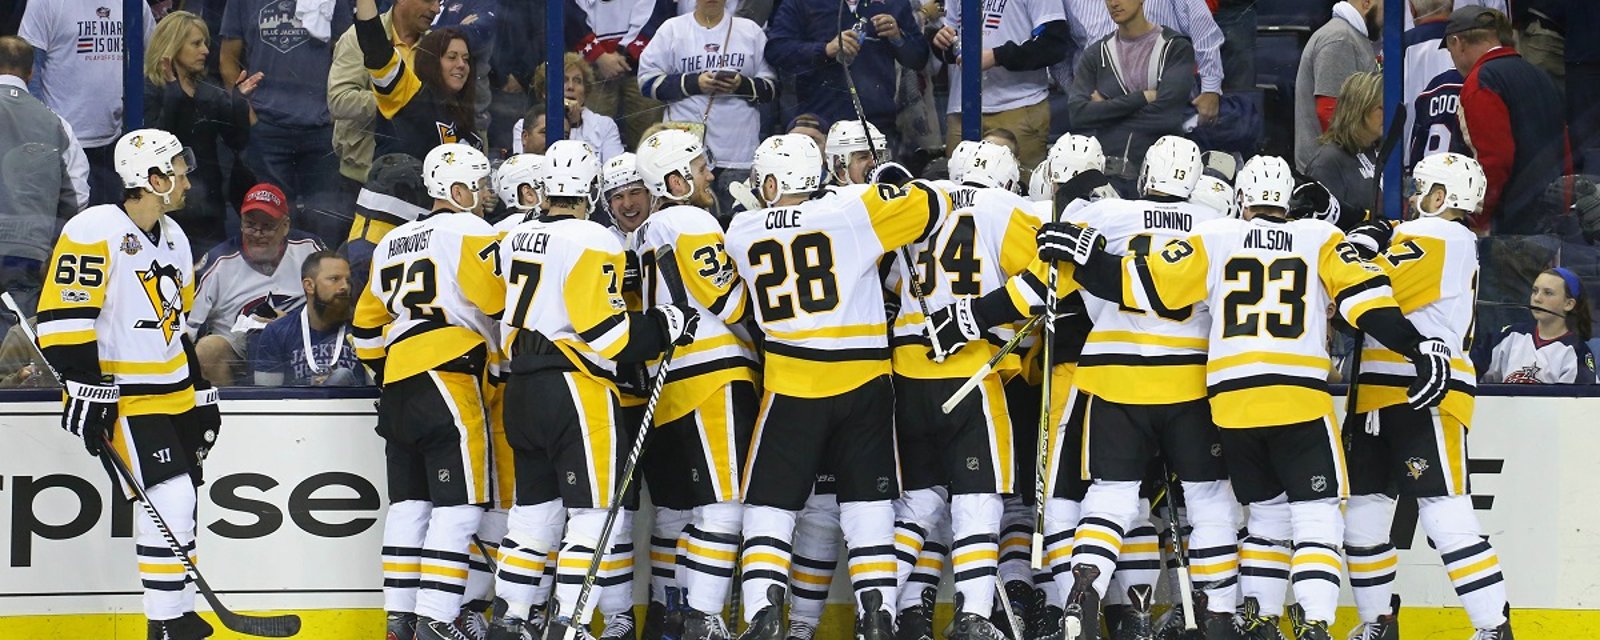 Penguins go to Nashville restaurant, get hilariously trolled by the staff.